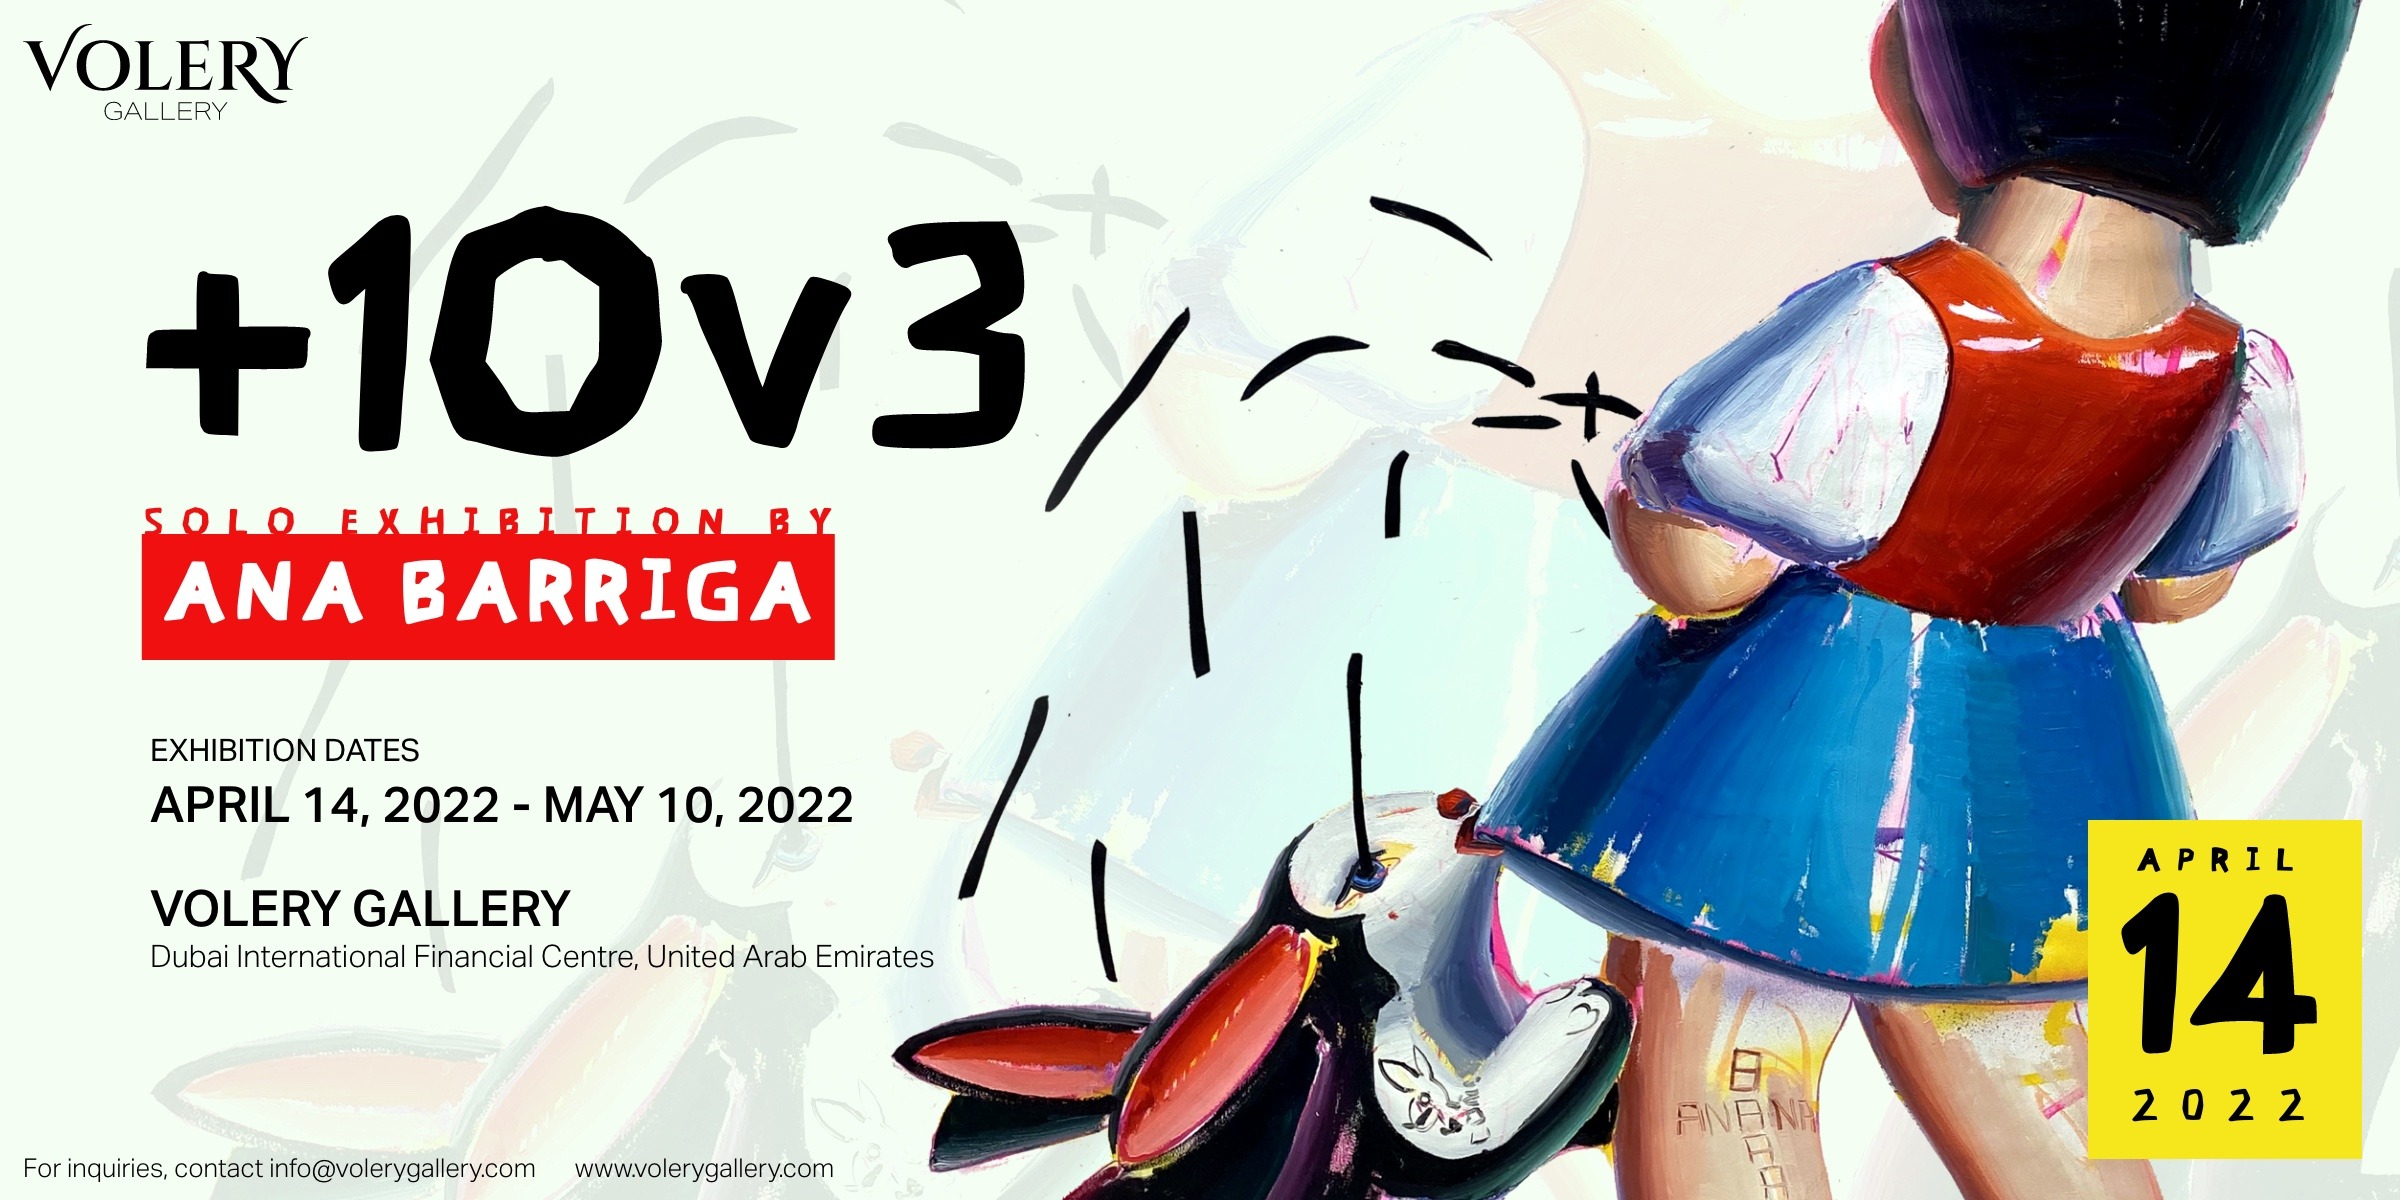 +1Ov3 Solo Exhibition by Ana Barriga - Coming Soon in UAE